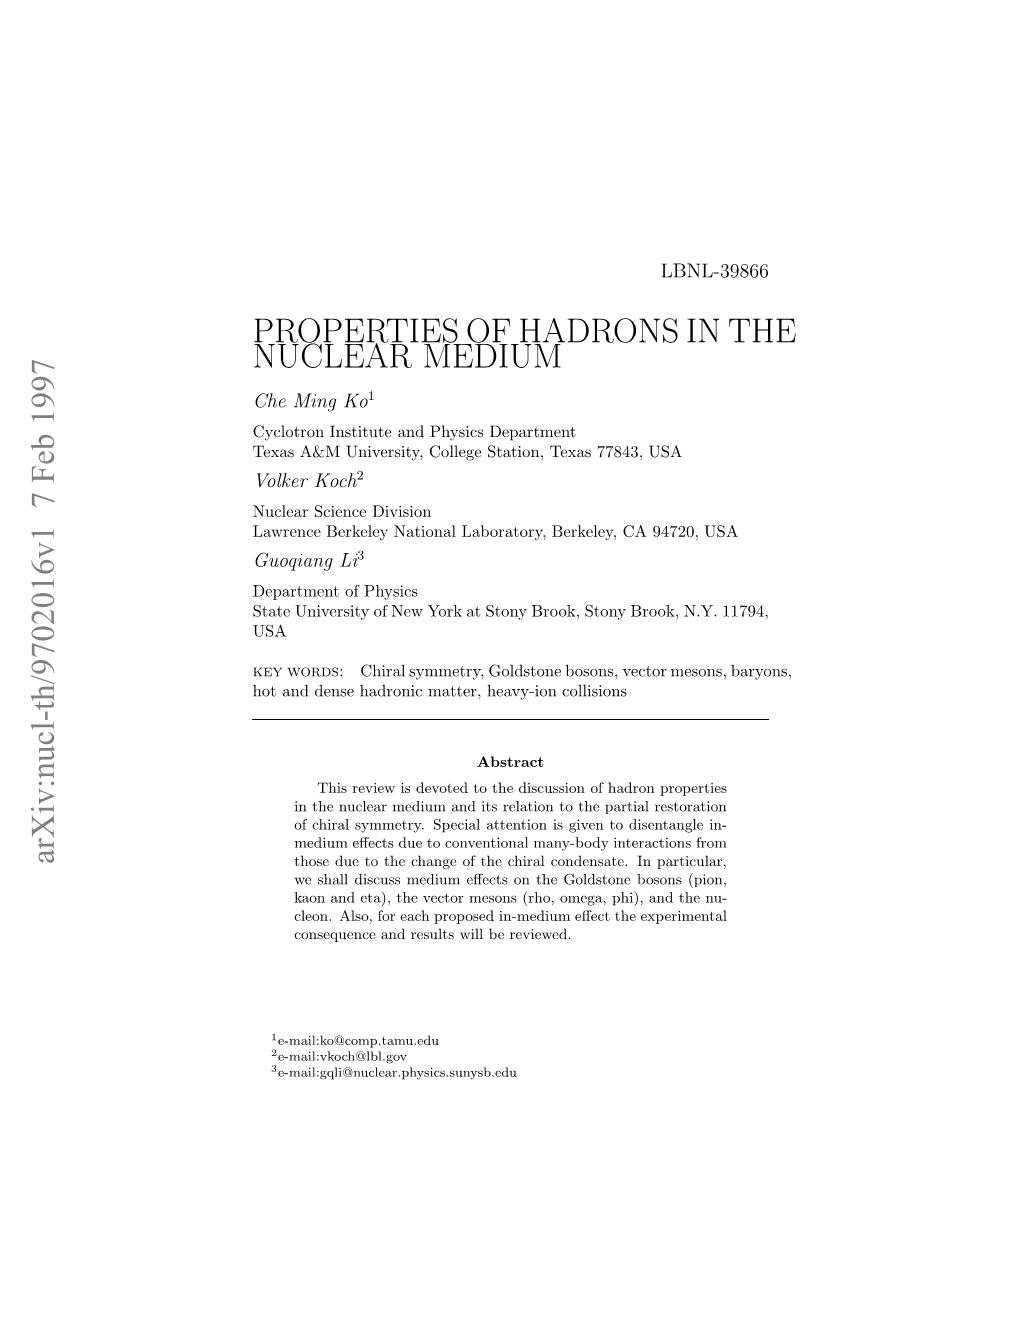 Properties of Hadrons in the Nuclear Medium